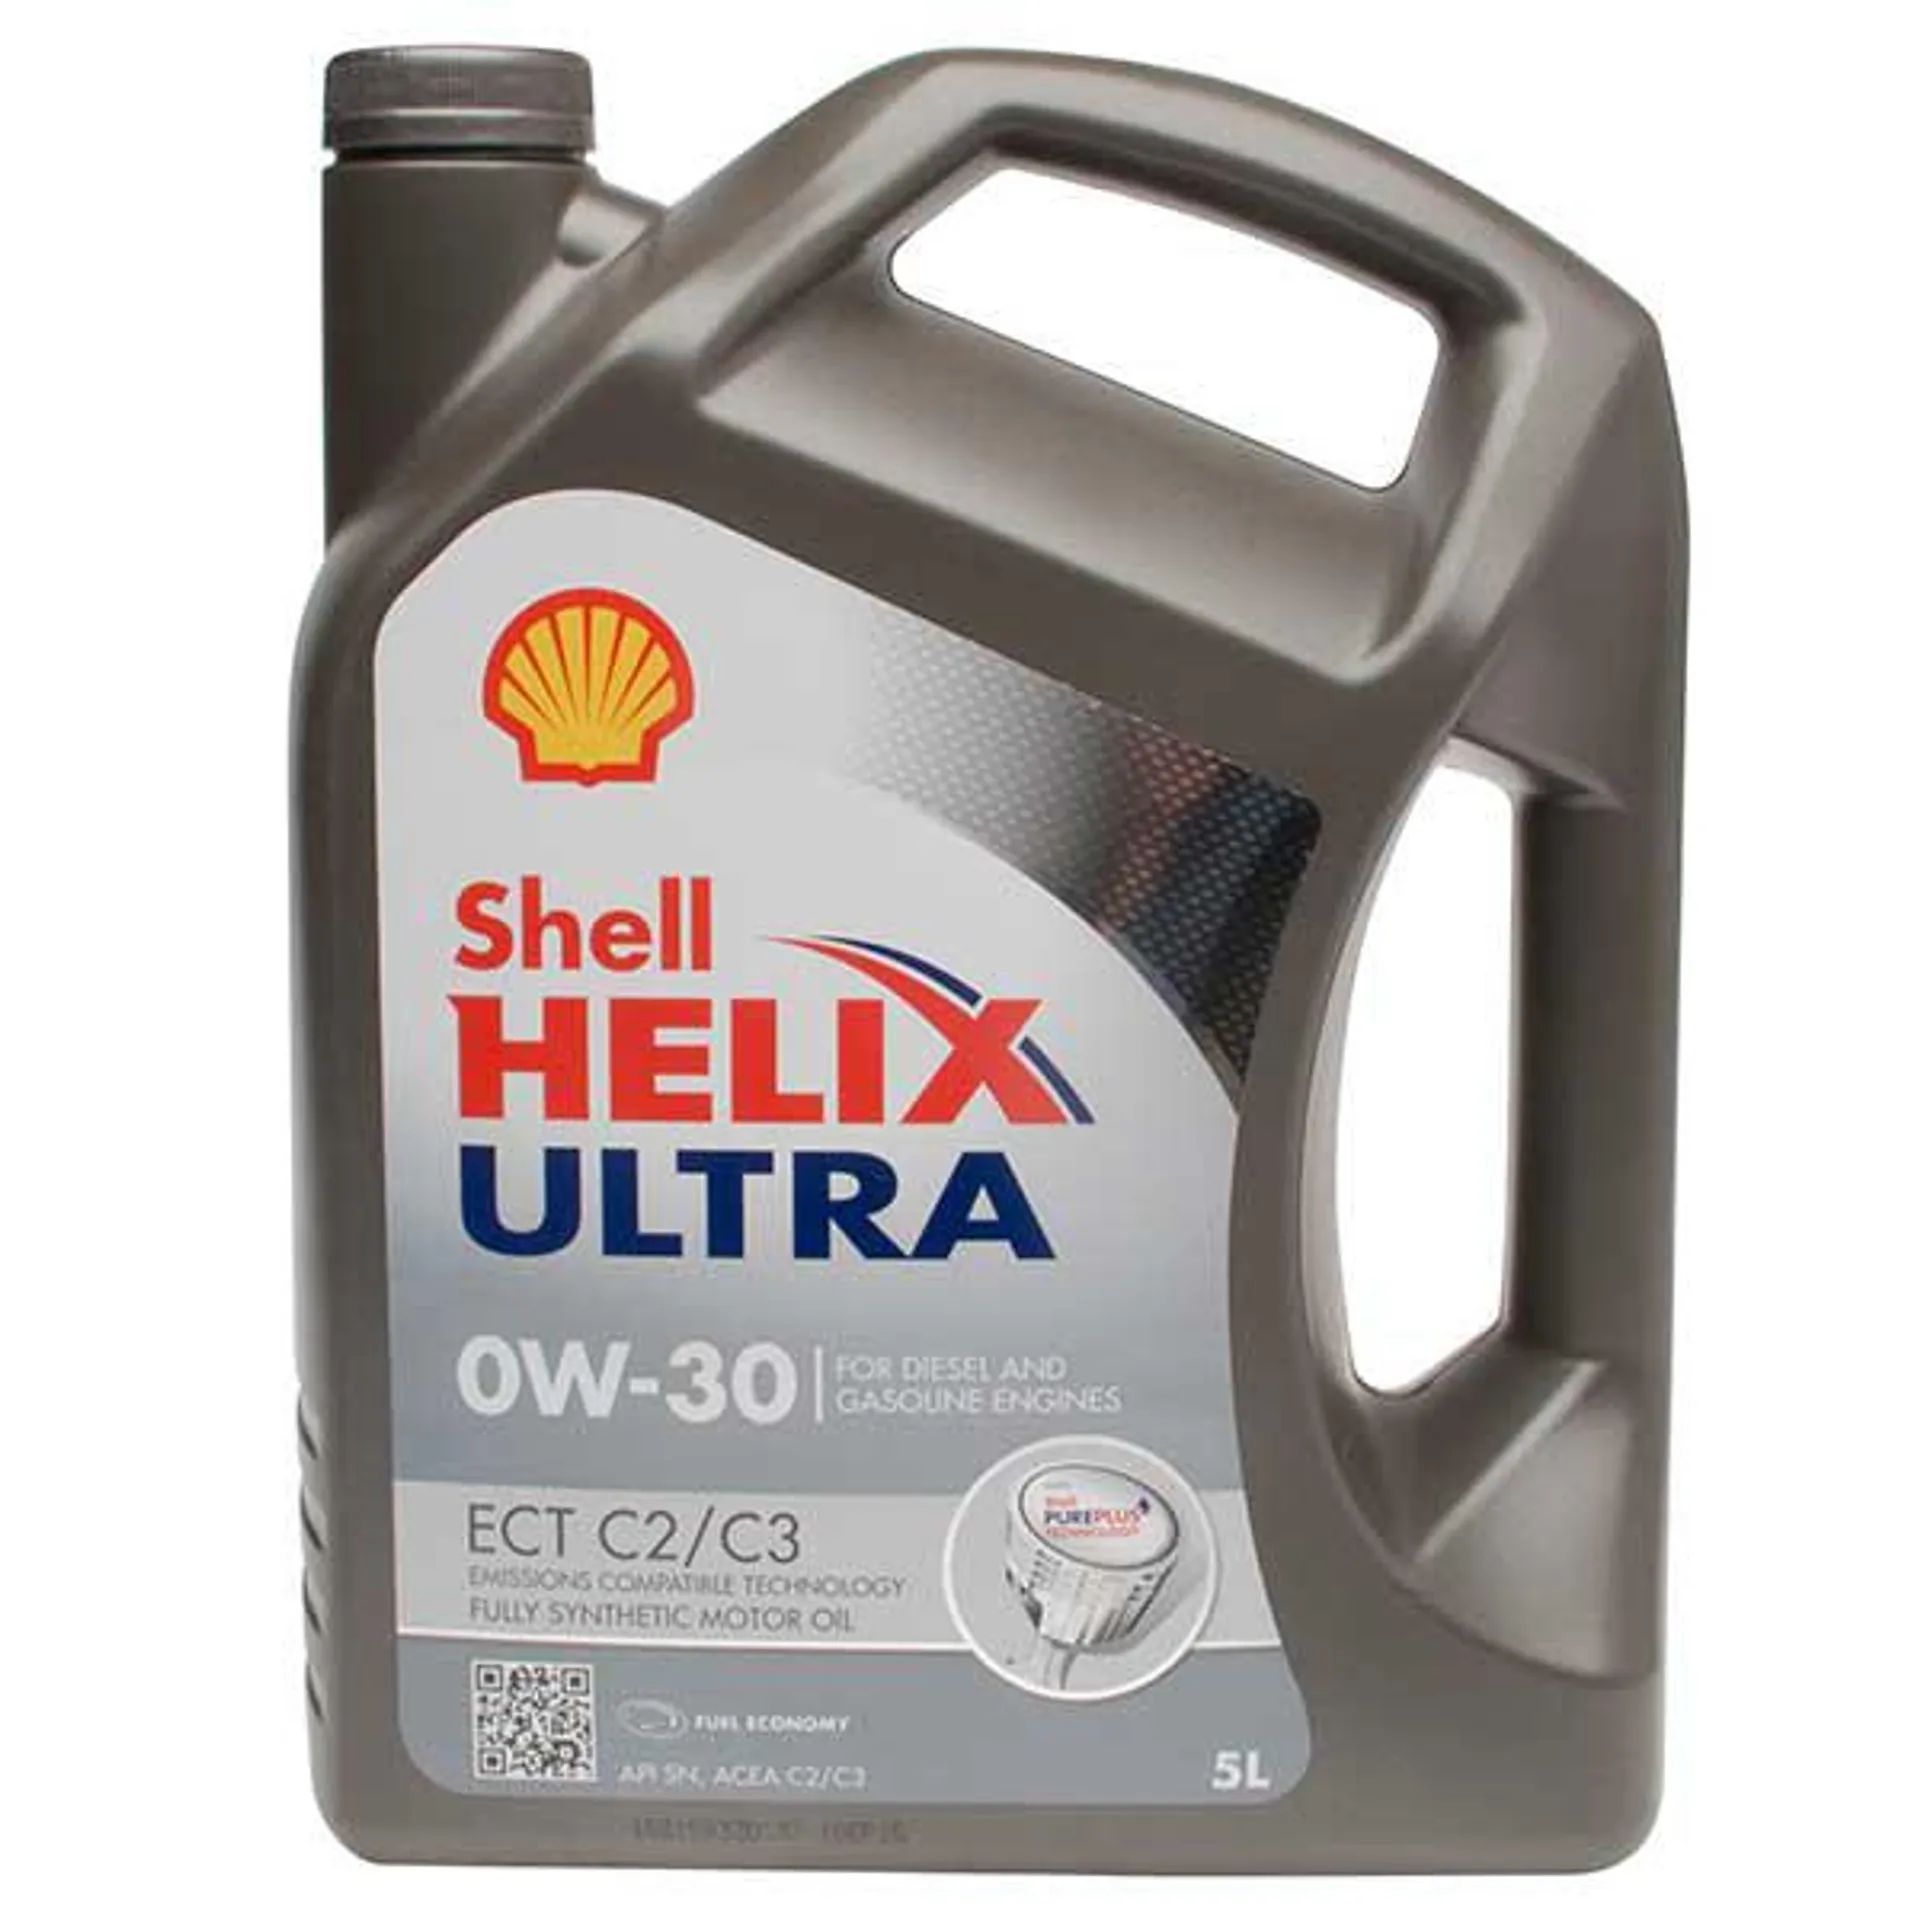 Shell Helix Ultra ECT C2/C3 Engine Oil - 0W-30 - 5Ltr